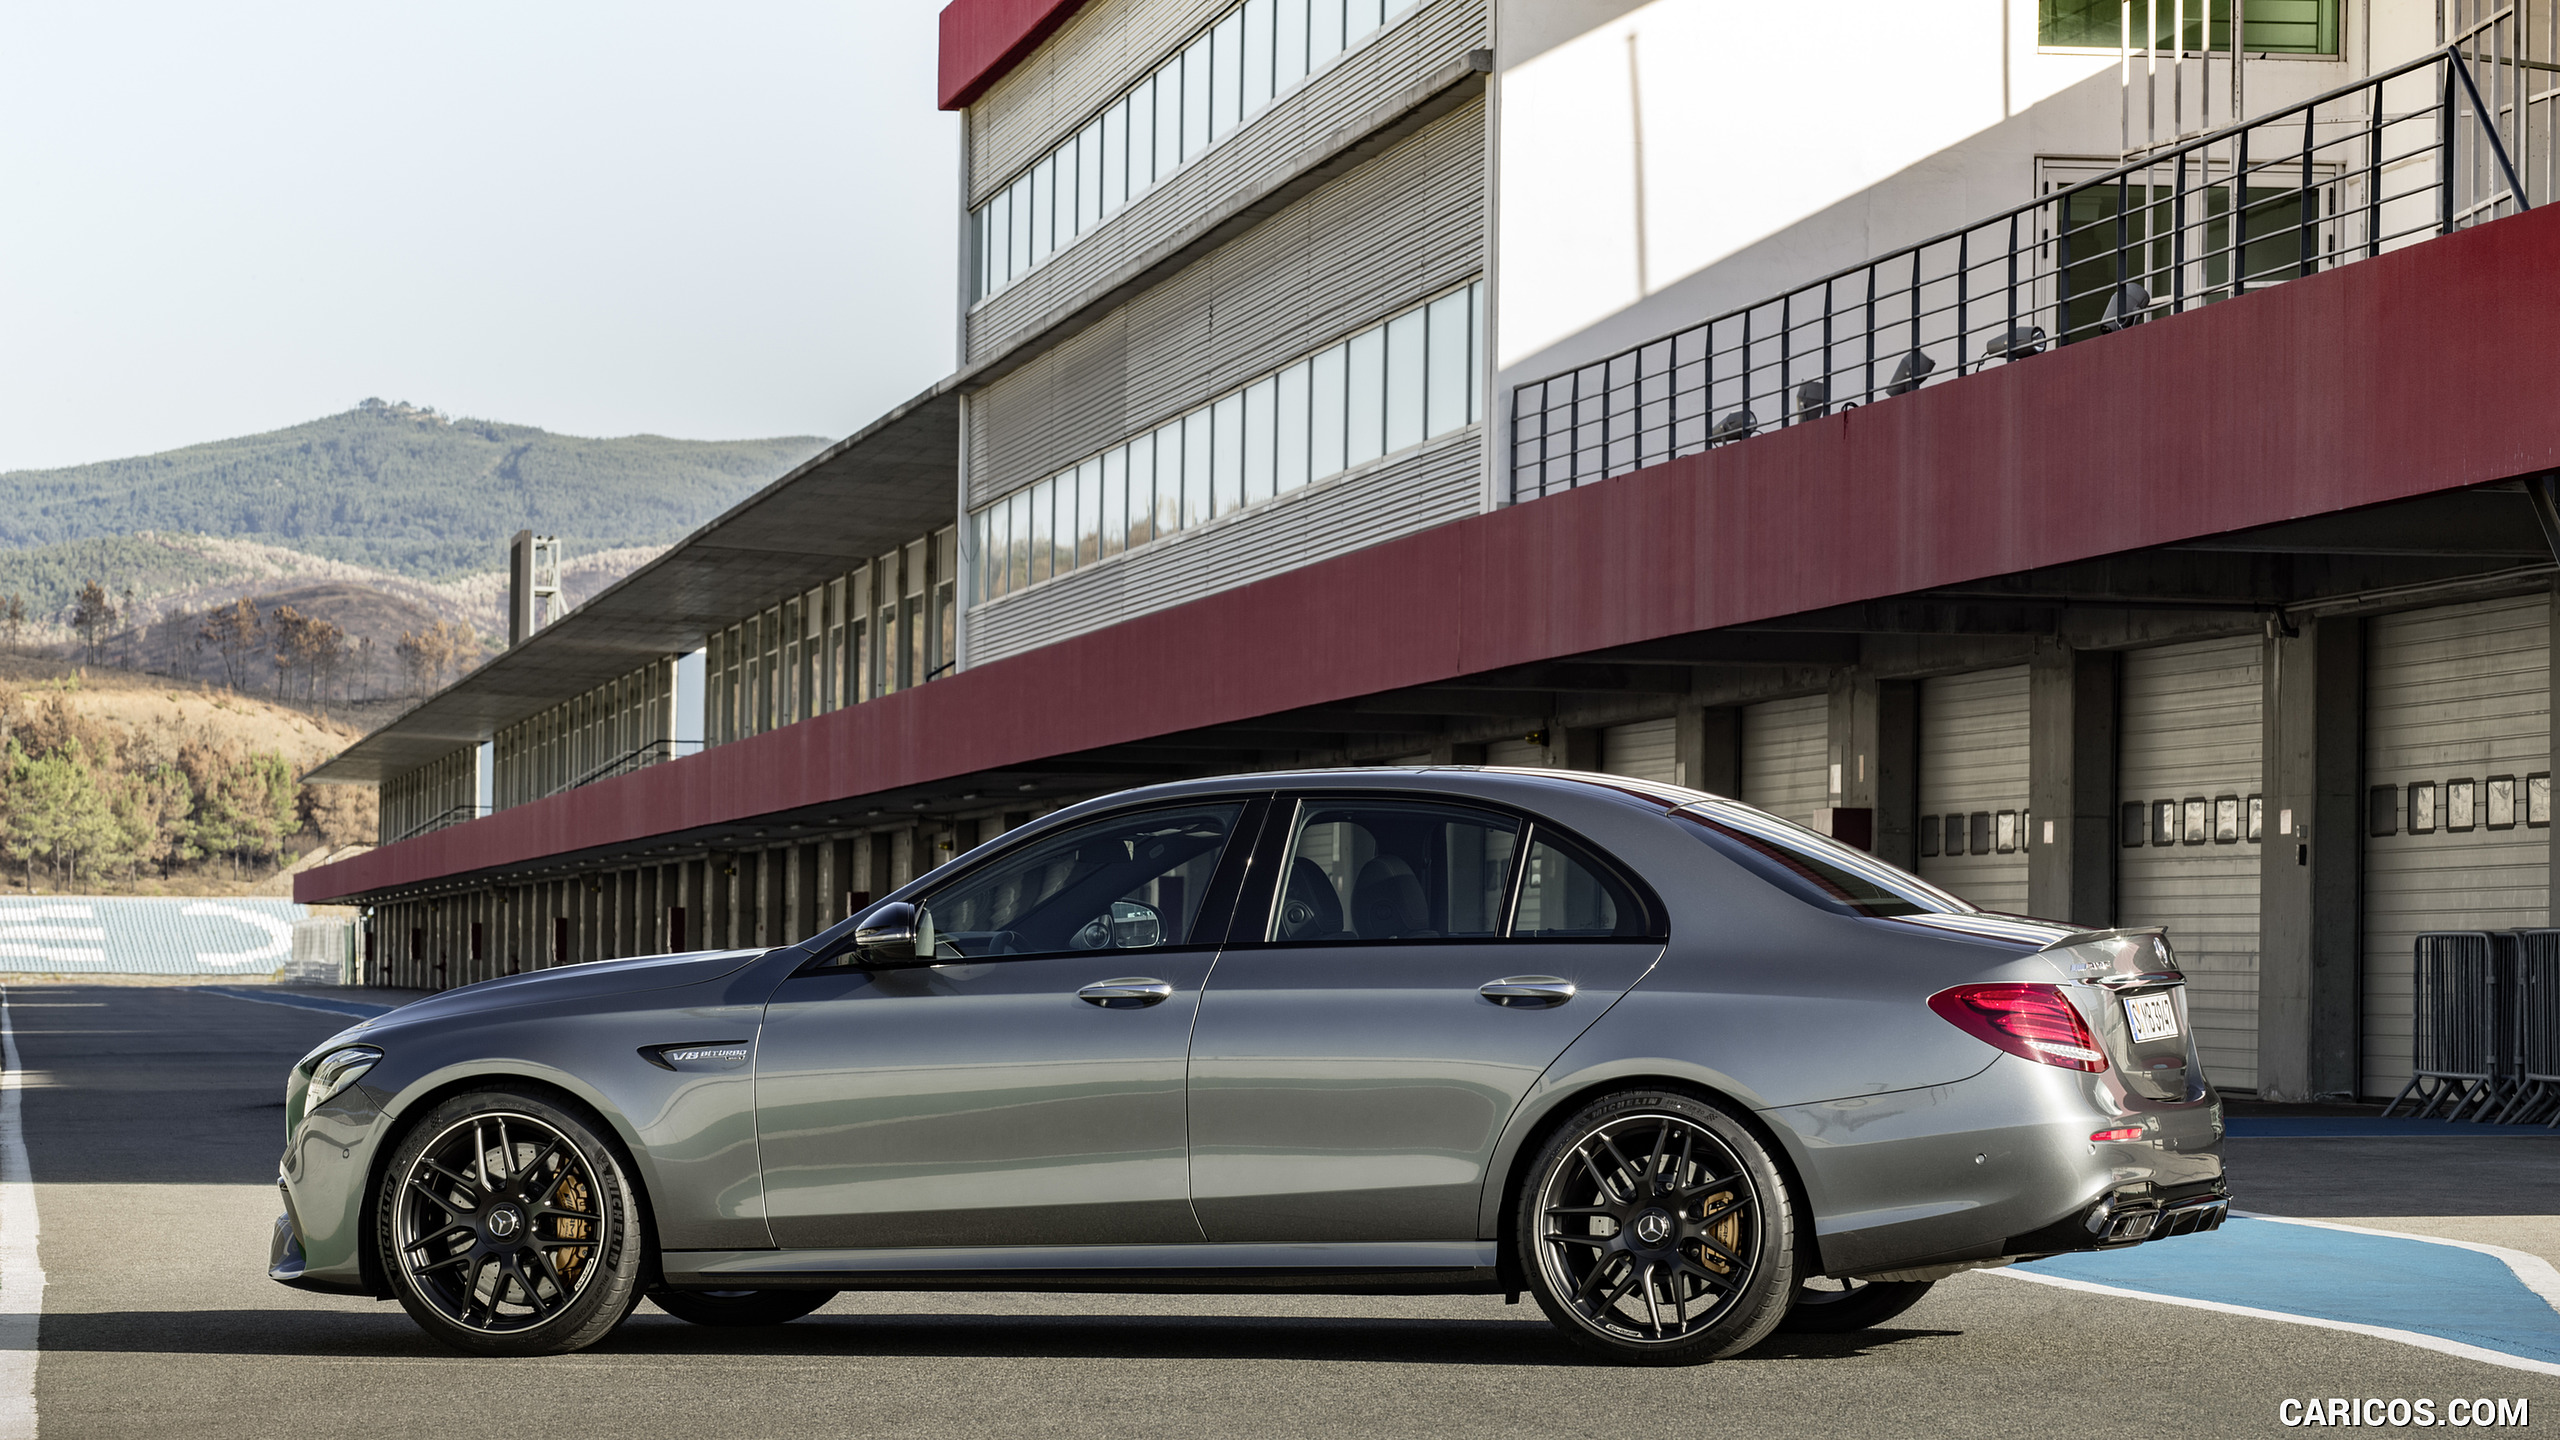 2018 Mercedes-AMG E63 S 4MATIC+ - Side, #23 of 323